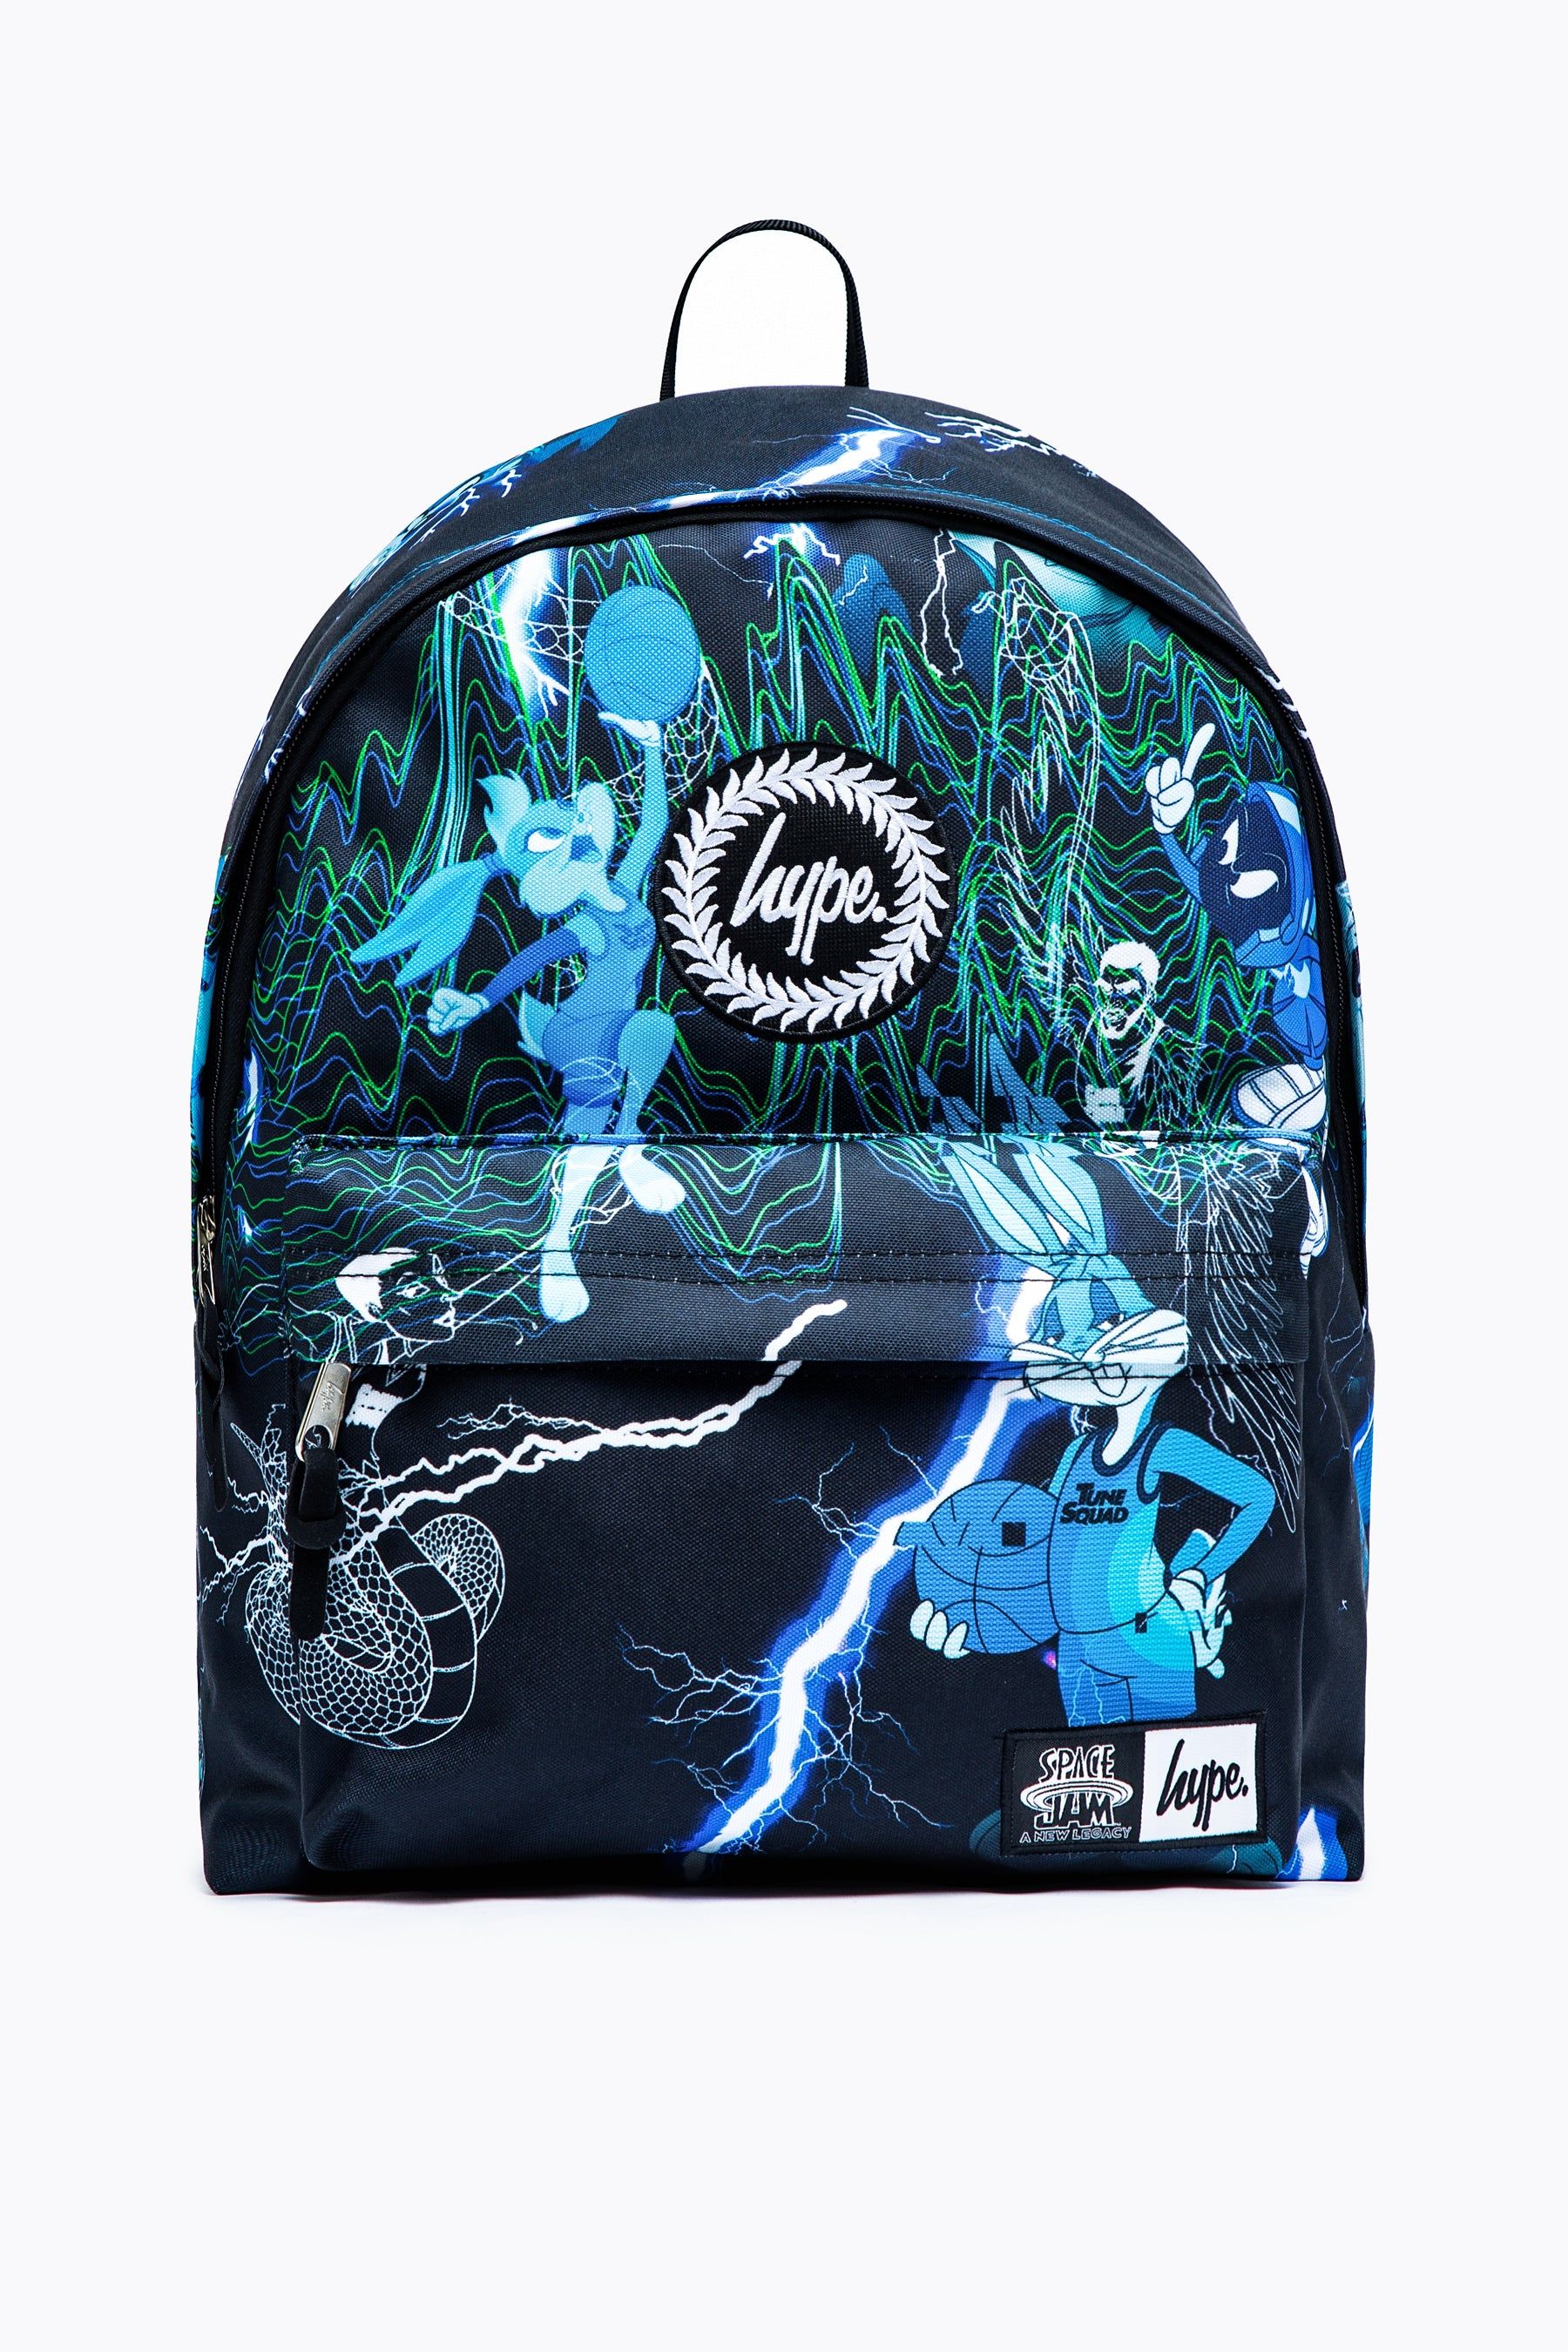 Make a statement in the Space Jam x HYPE. Digital Tune Squad Backpack. Designed in a futuristic inspired all over print in a monochrome, blue and green  colour palette. Featuring your all-time-favourite Looney Tunes characters. Measuring at 42cms x 30cms x 12cms, finished with a front mini pocket, grab handle, embossed zips, branded inside lining and the iconic HYPE. crest badge in monochrome on the front. The straps offer supreme comfort with just the right amount of padding. Wipe clean only.